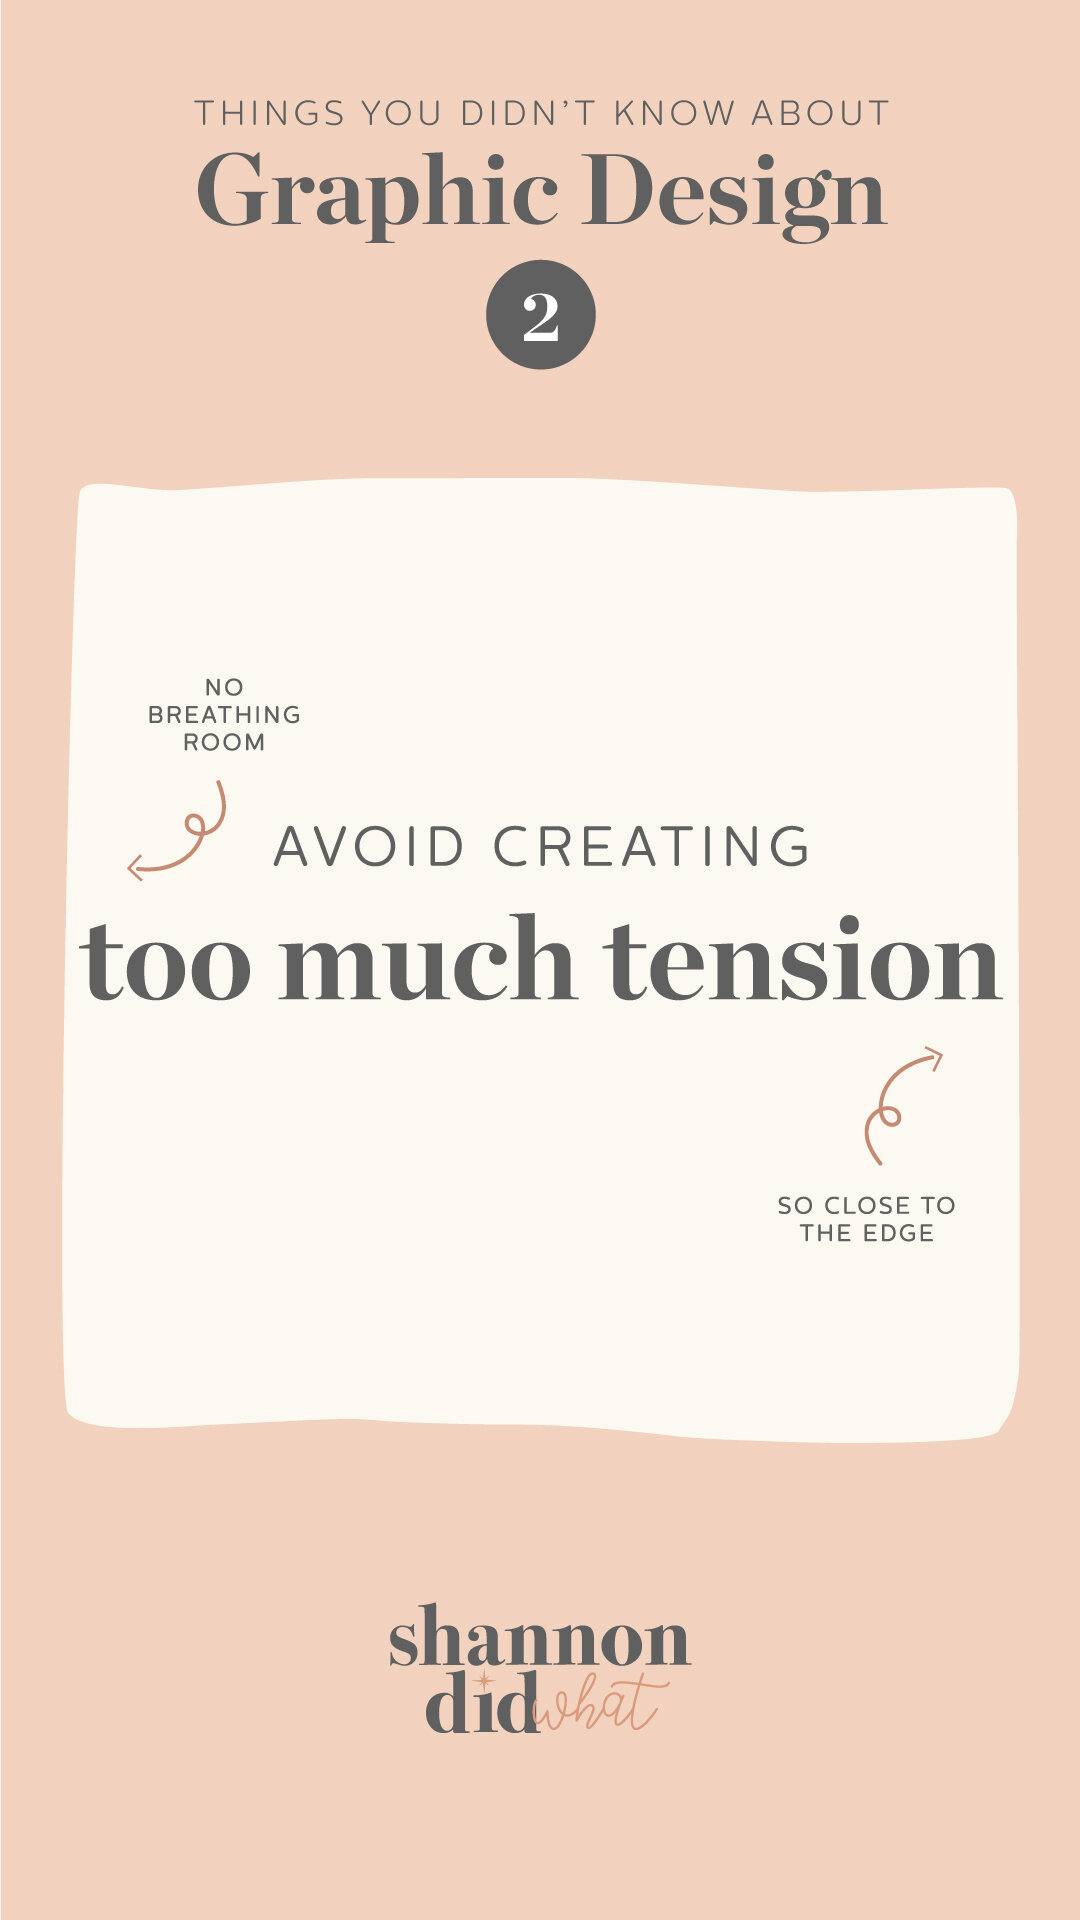 Things you didnt know about Graphic Design  - Avoid creating too much tension (Copy) (Copy)